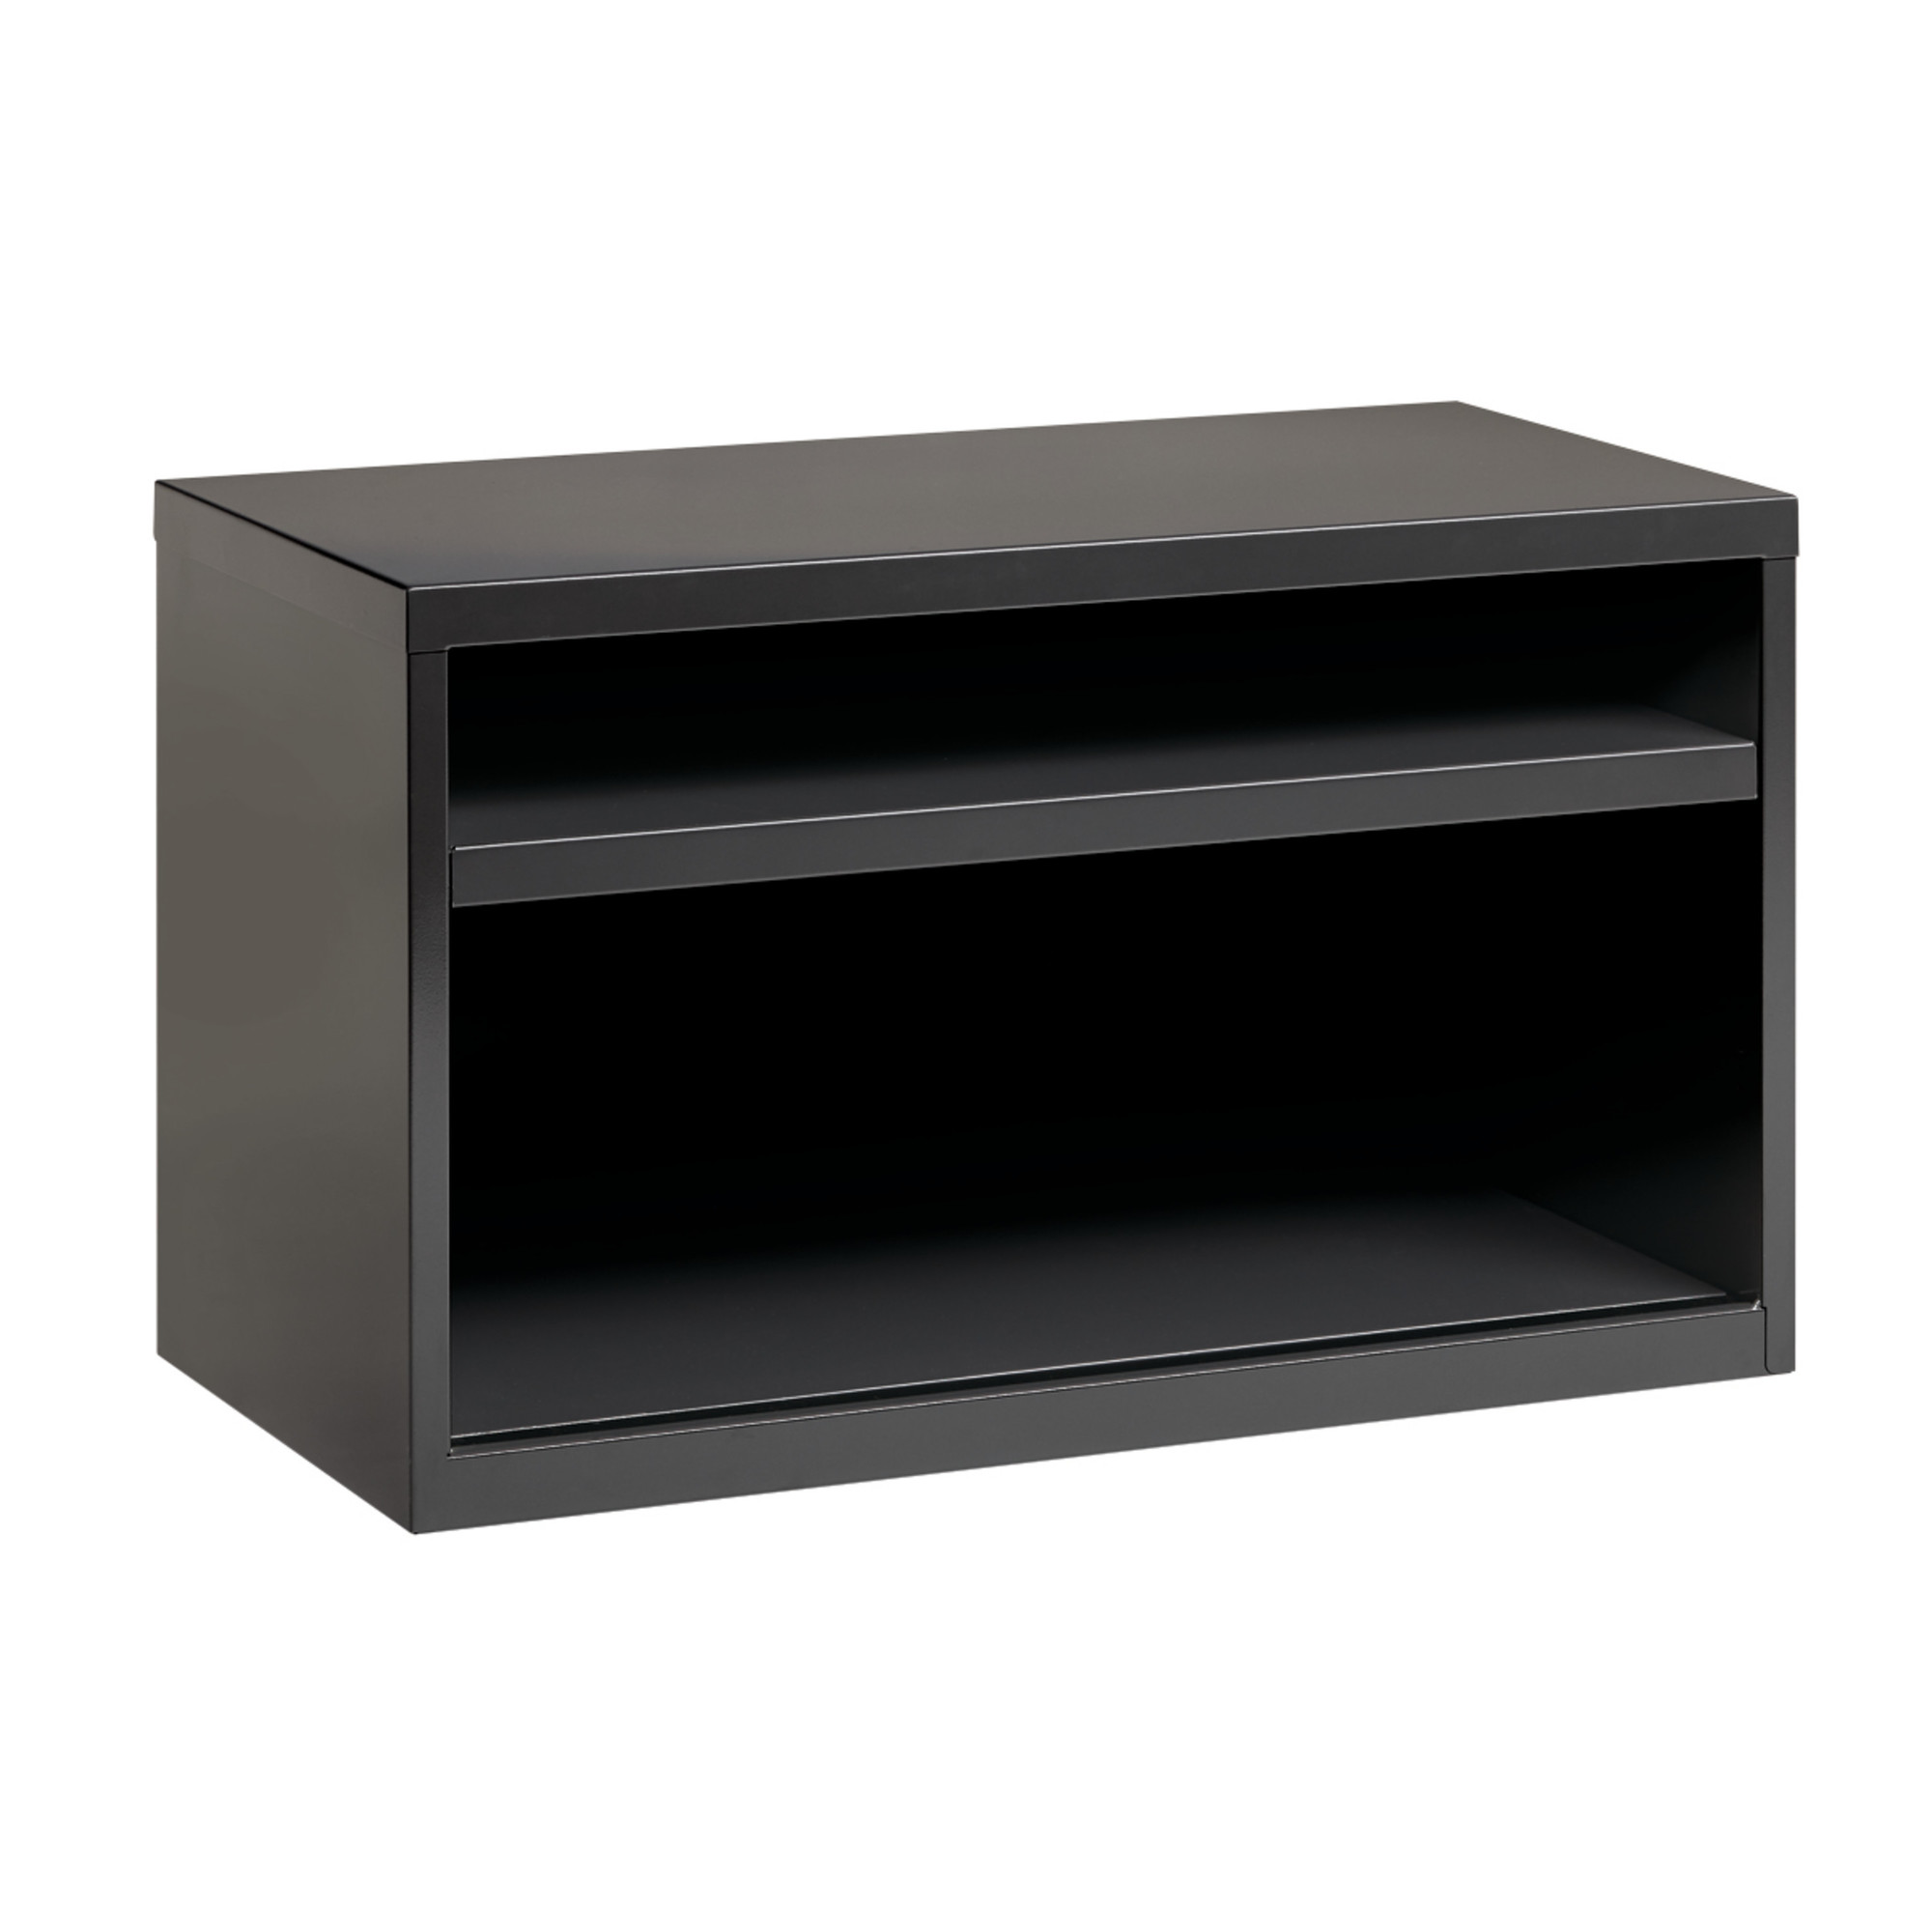 Hirsh Industries, Credenza Lateral Cabinet with Open Shelves, Height 22 in, Width 36 in, Model 20509